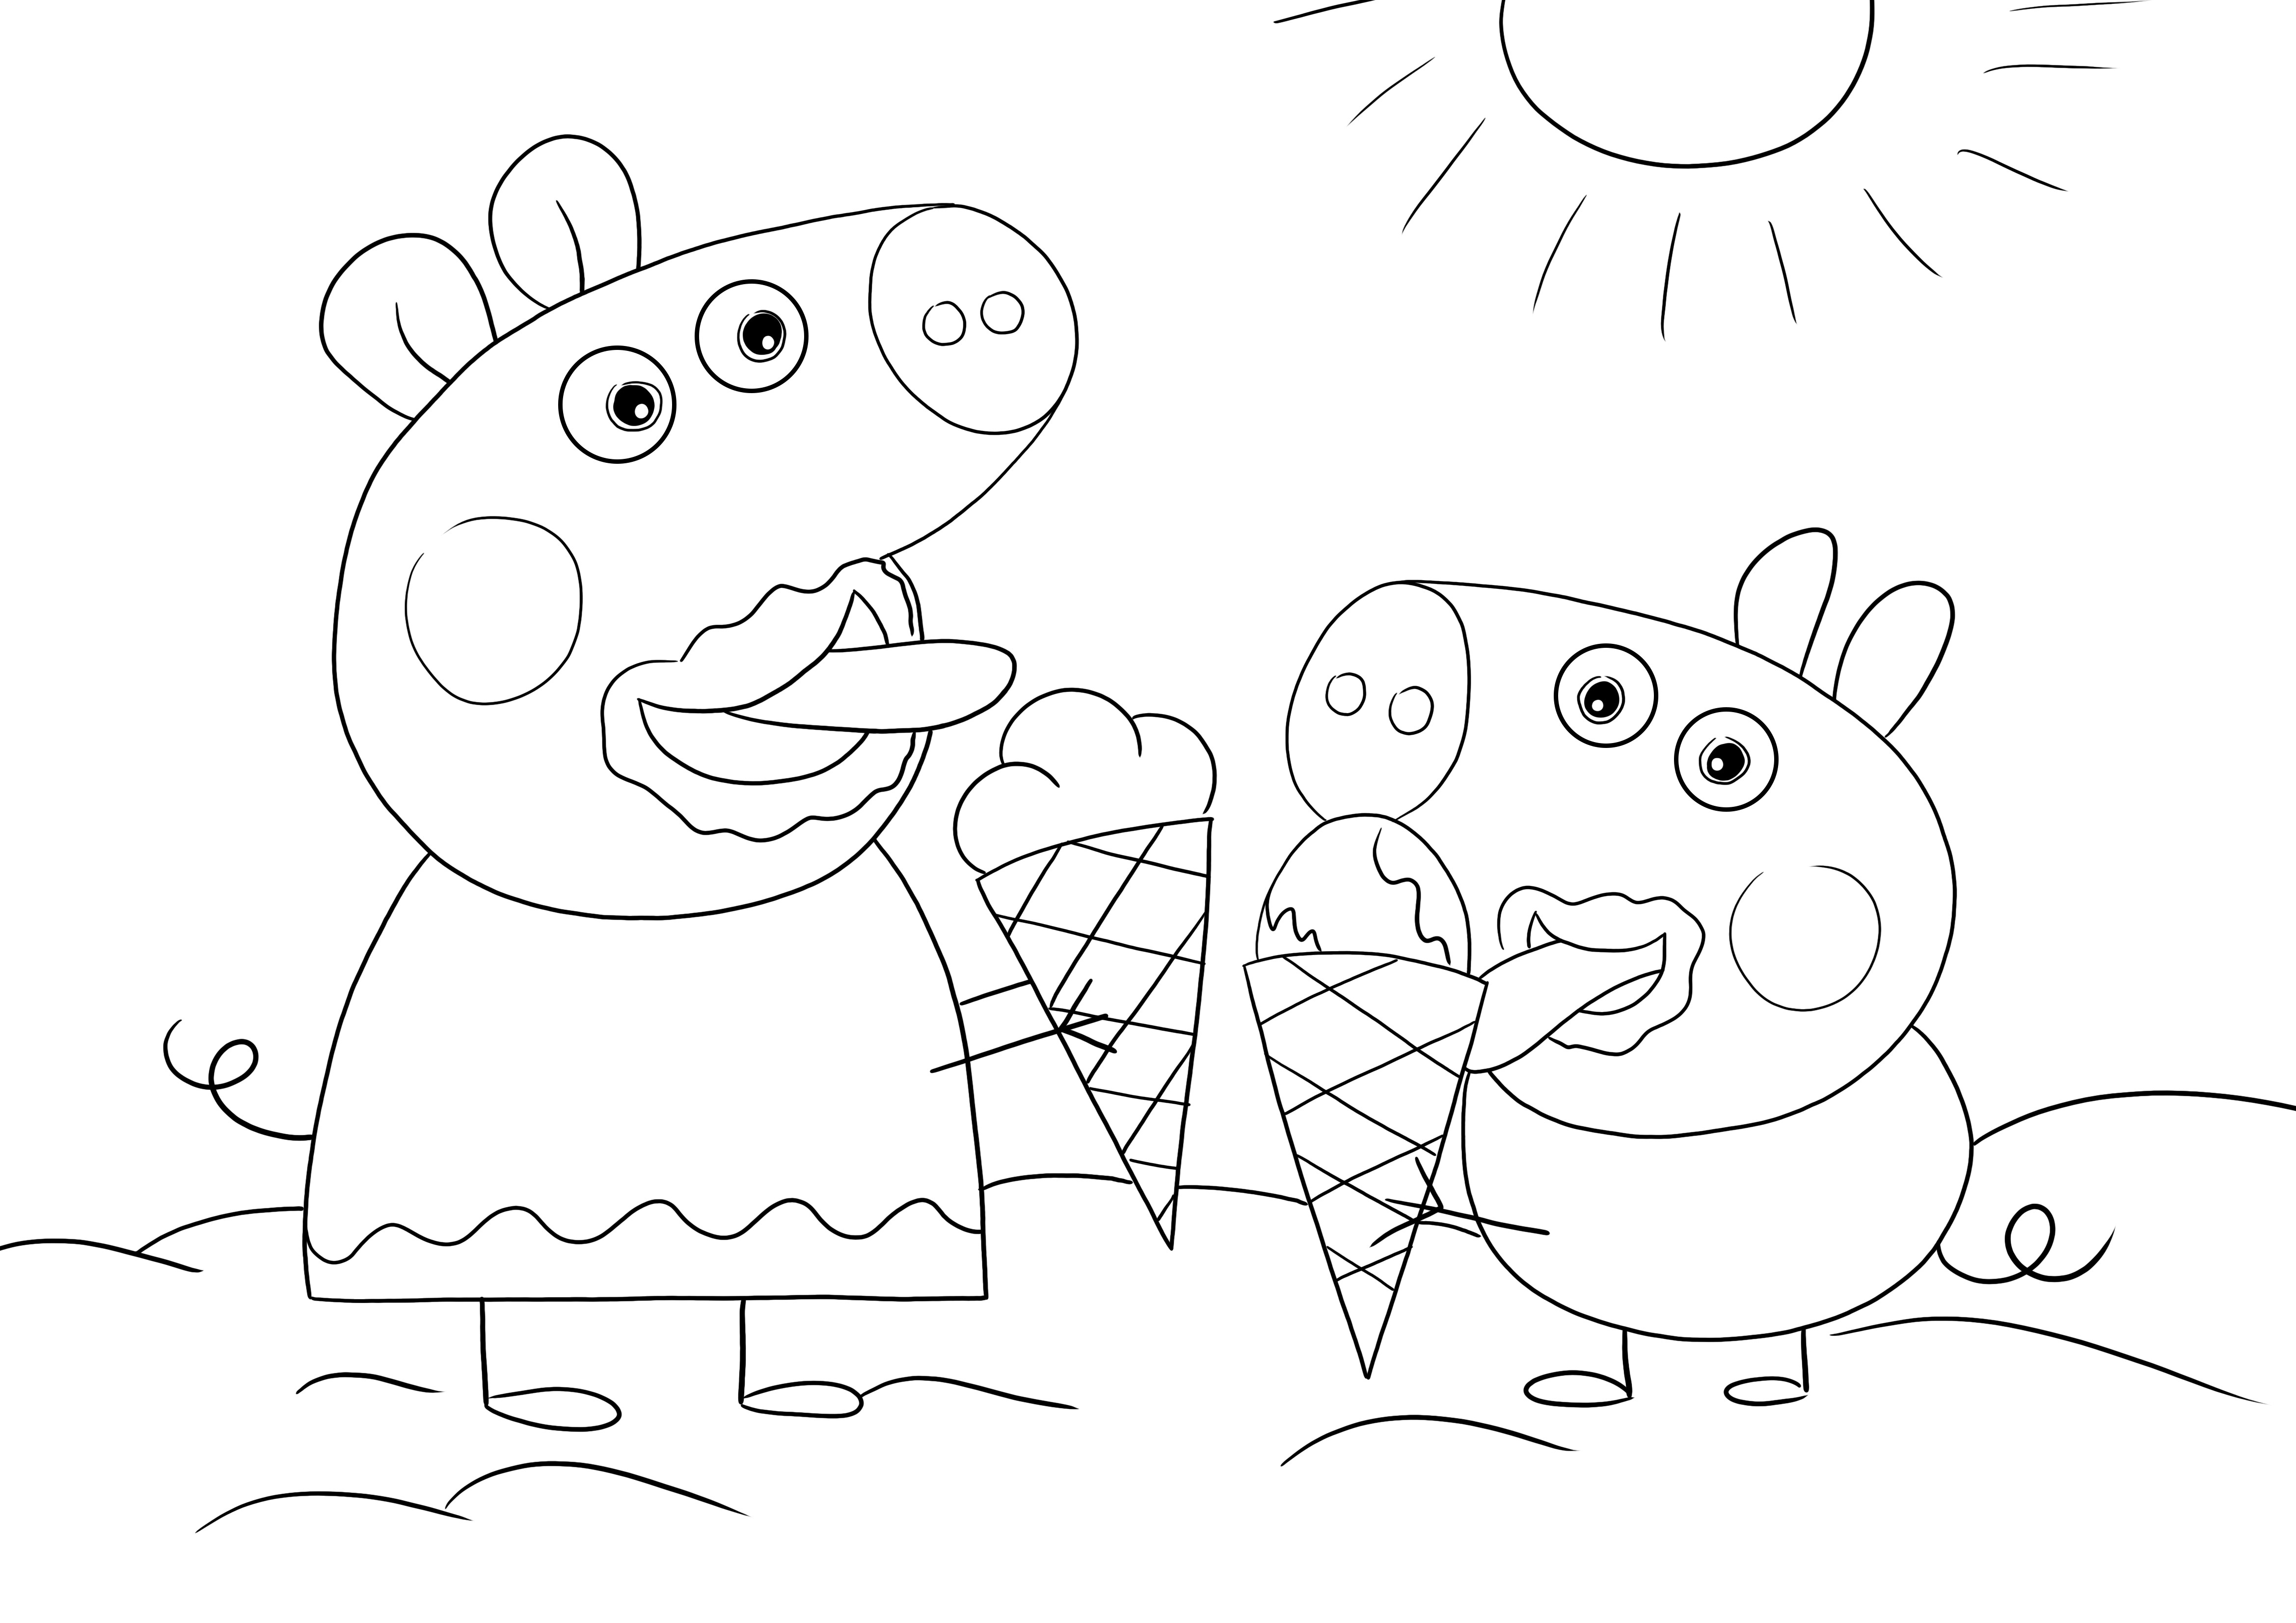 Peppa and George eating ice cream to color or download for free